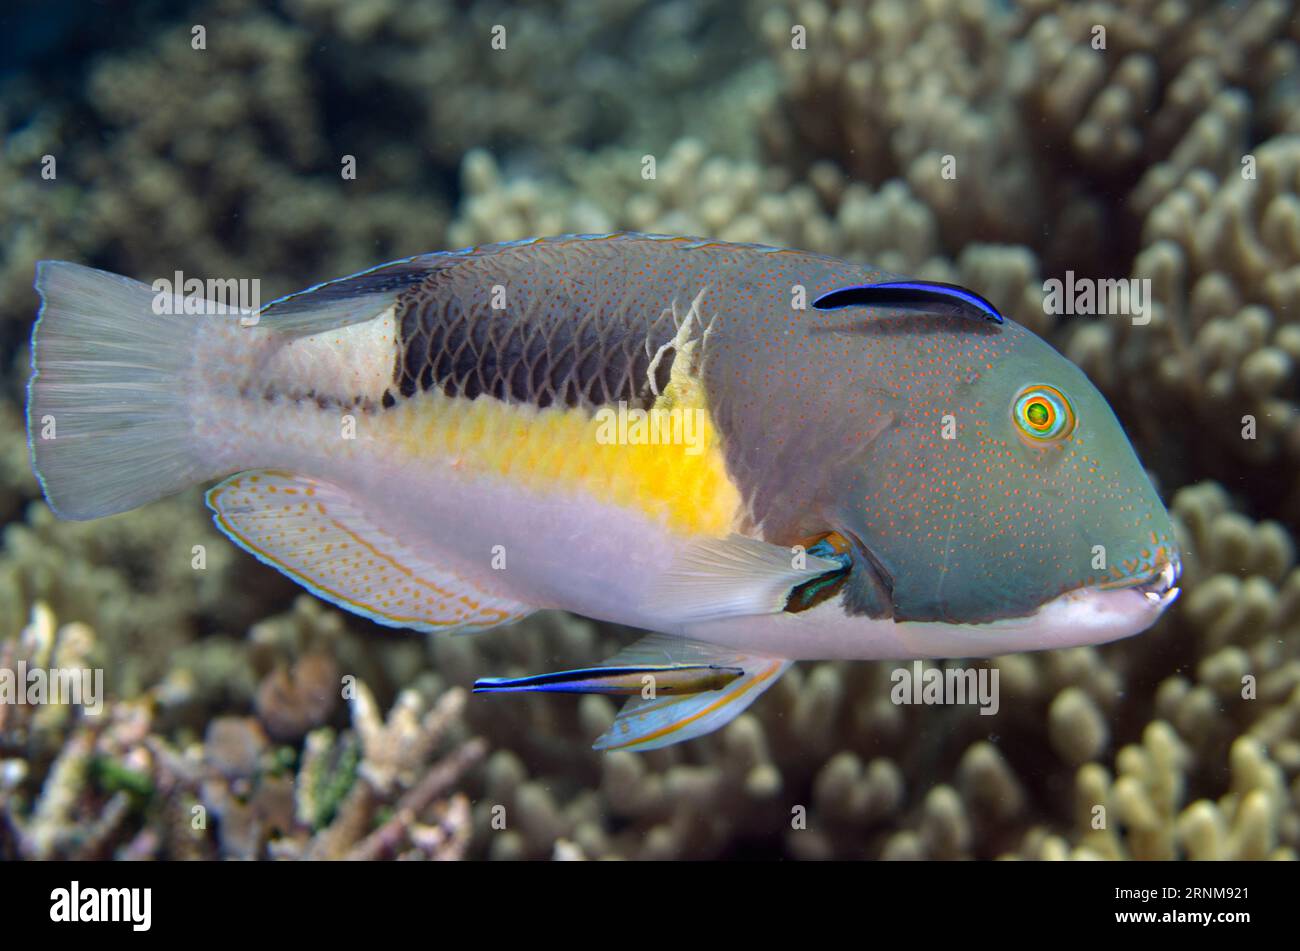 Male Anchor Tuskfish, Choerodon anchorago, being cleaned by pair of Bluestreak Cleaner Wrasse, Labroides dimidiatus, Sawanderek Jetty dive site, Mansu Stock Photo